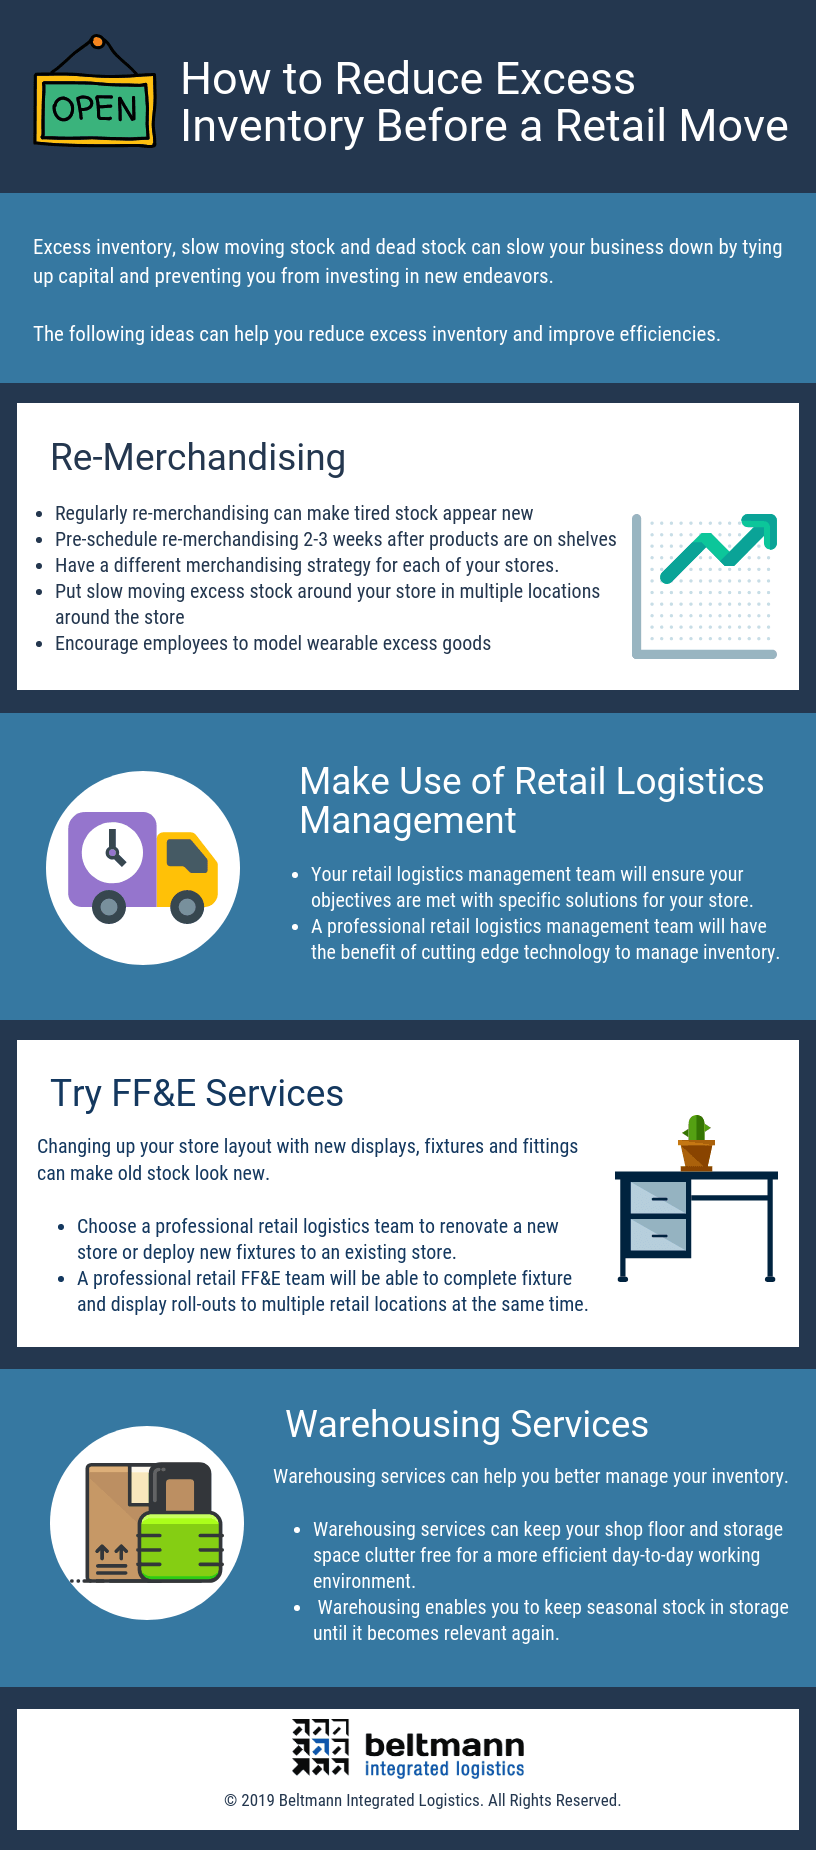 How to Reduce Excess Inventory Before a Retail Move Infographic